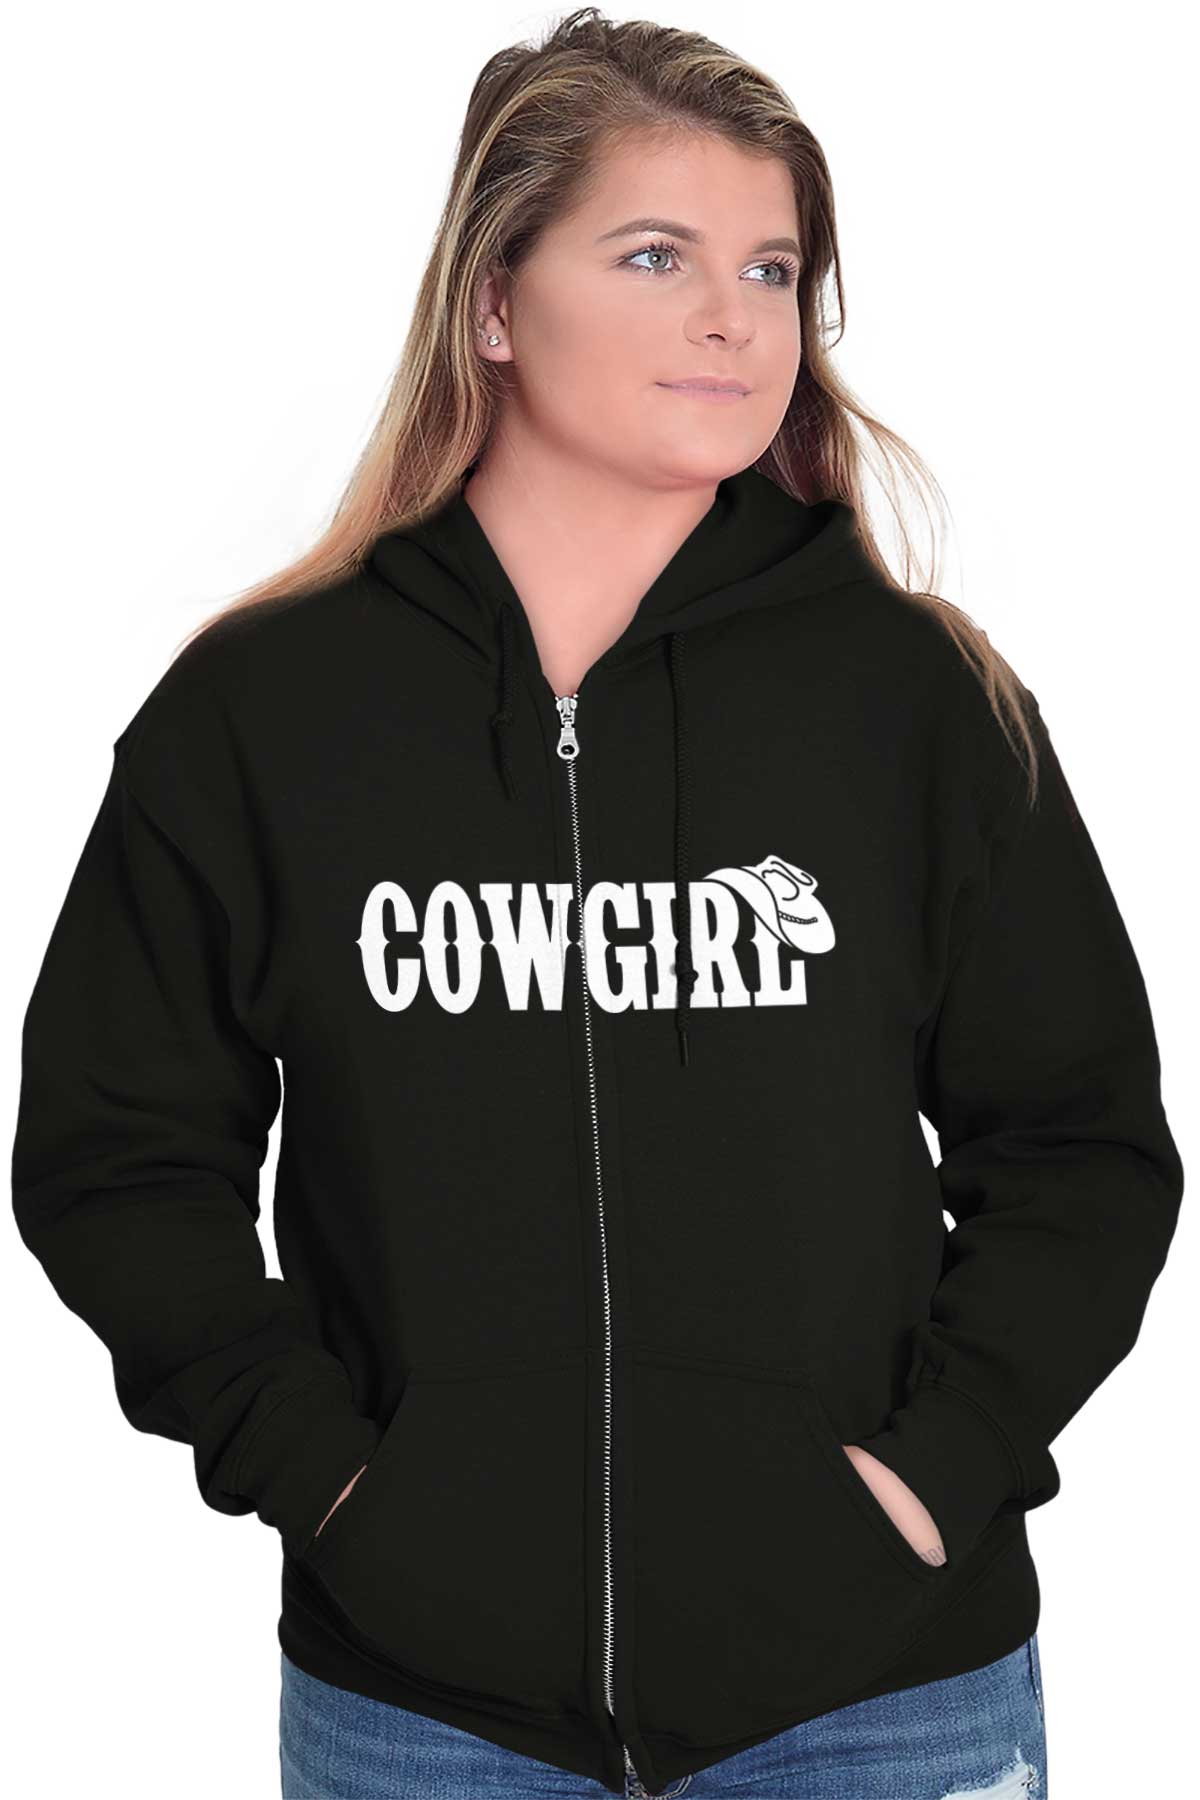 Cowgirl Western Country USA Ranch Rodeo Gift Women Zip Hoodie Jacket ...